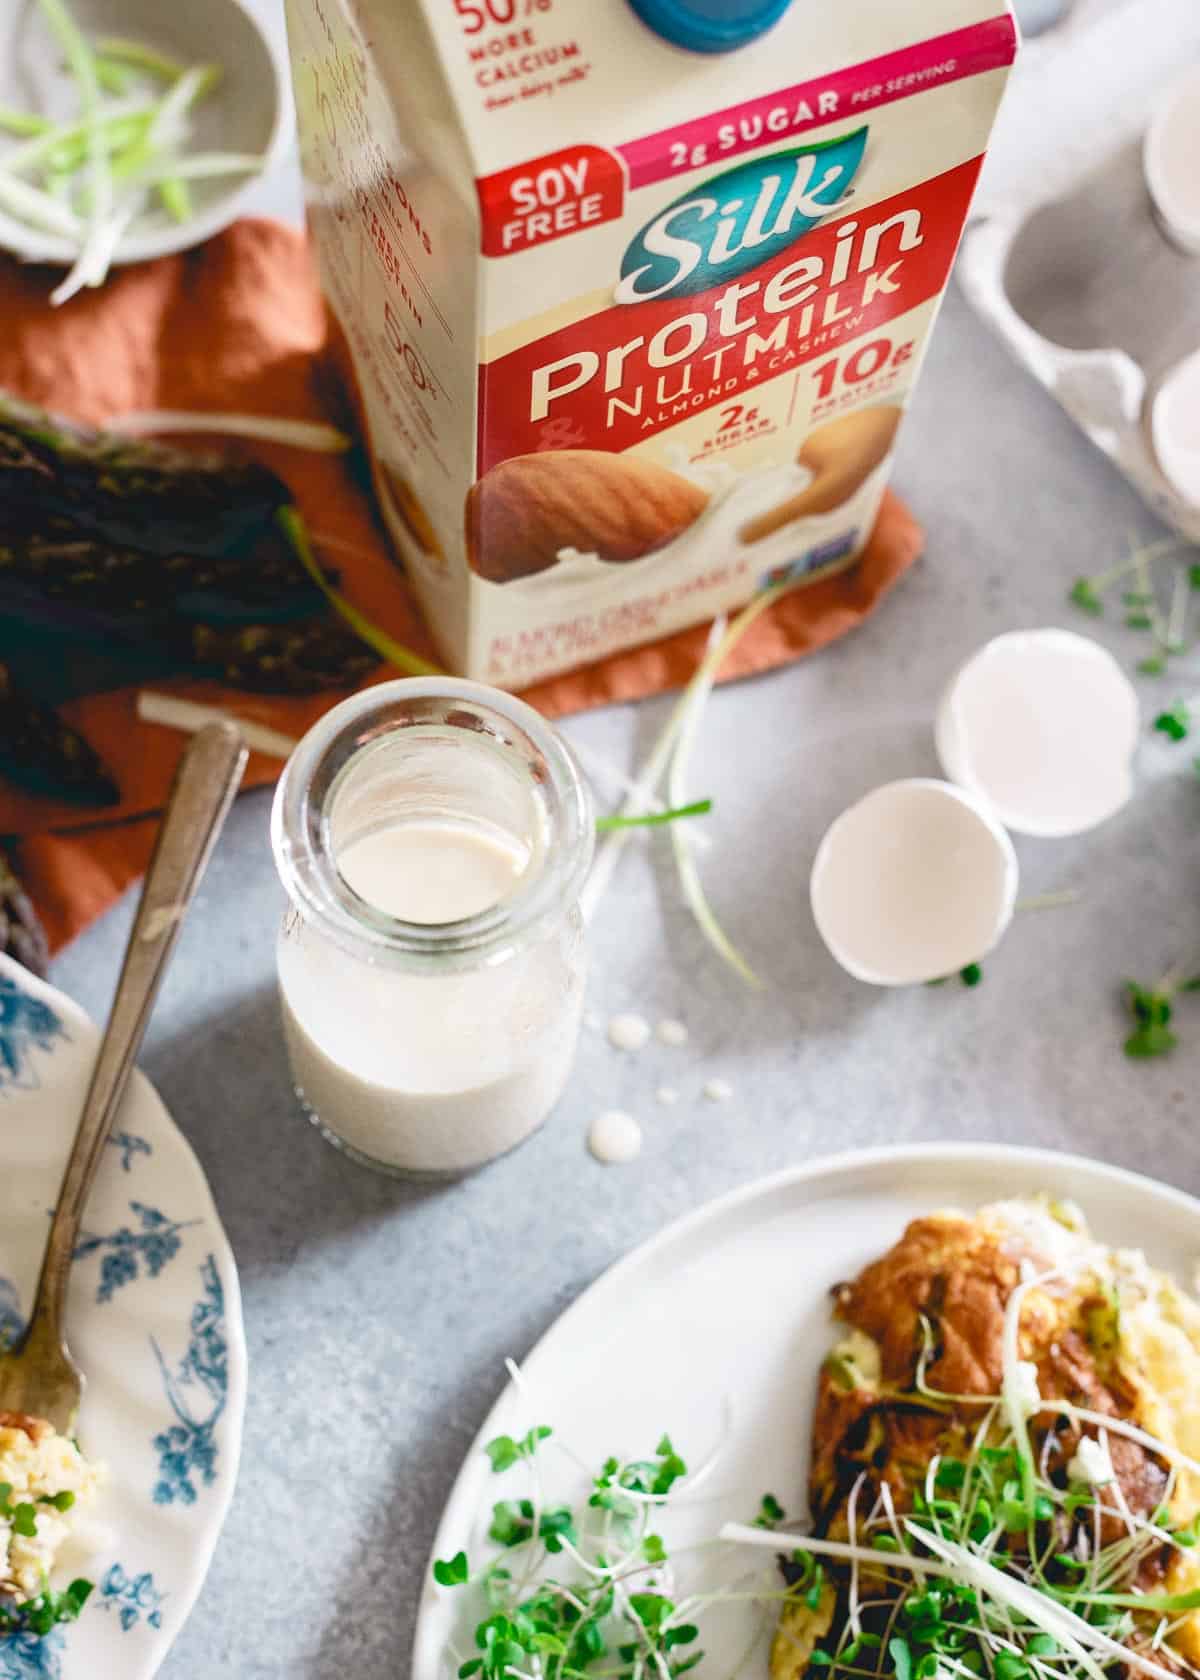 Made with Silk's new protein nut milk, this omelette souffle has all the light and fluffy texture of a souffle combined with a savory breakfast omelette perfect for spring.